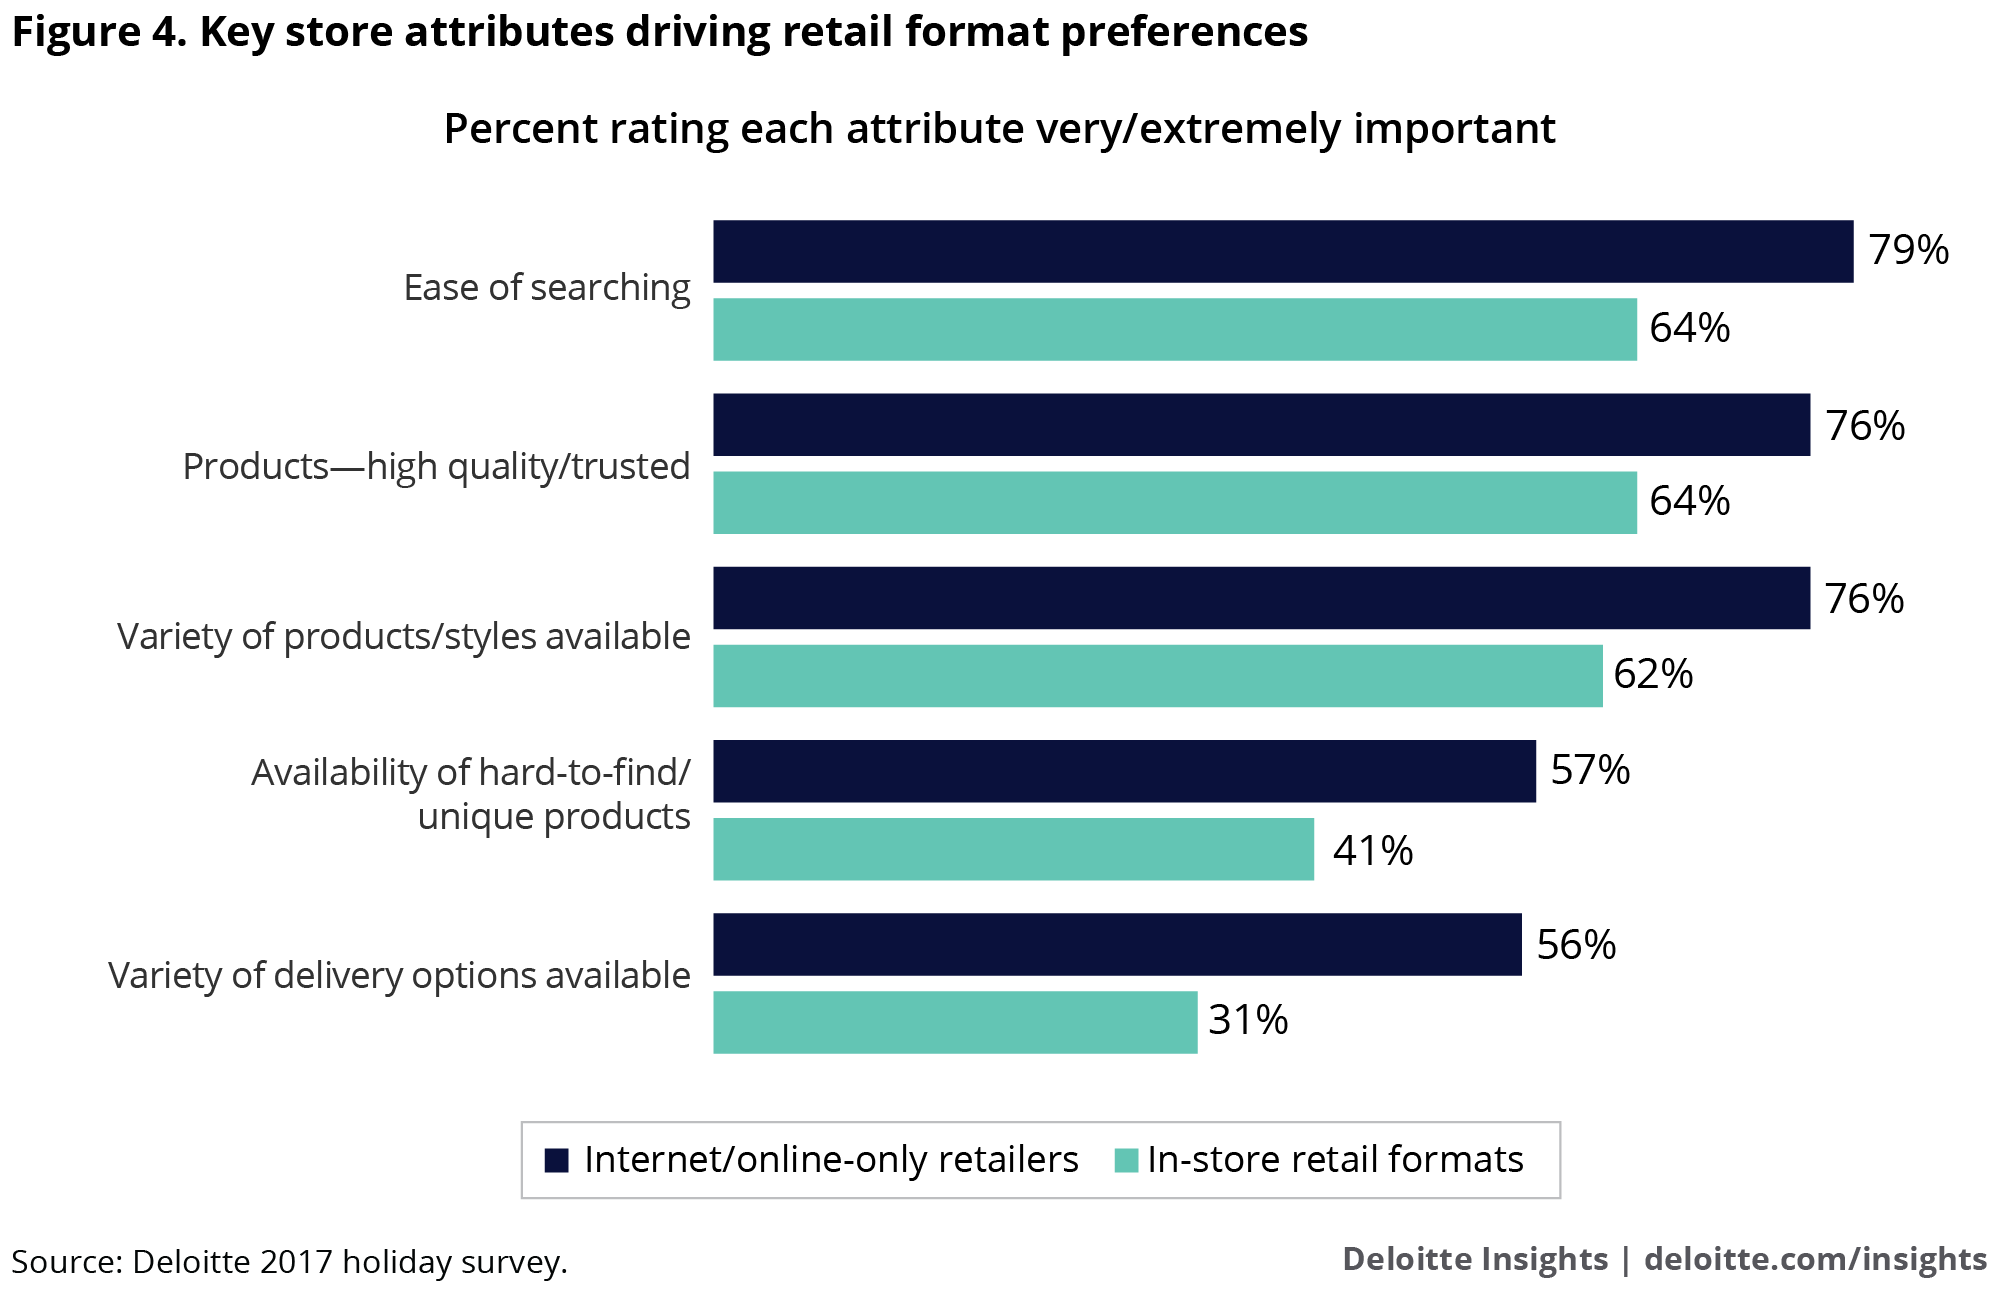 Consumer preferences by store format and attributes: 2017 holiday shopping